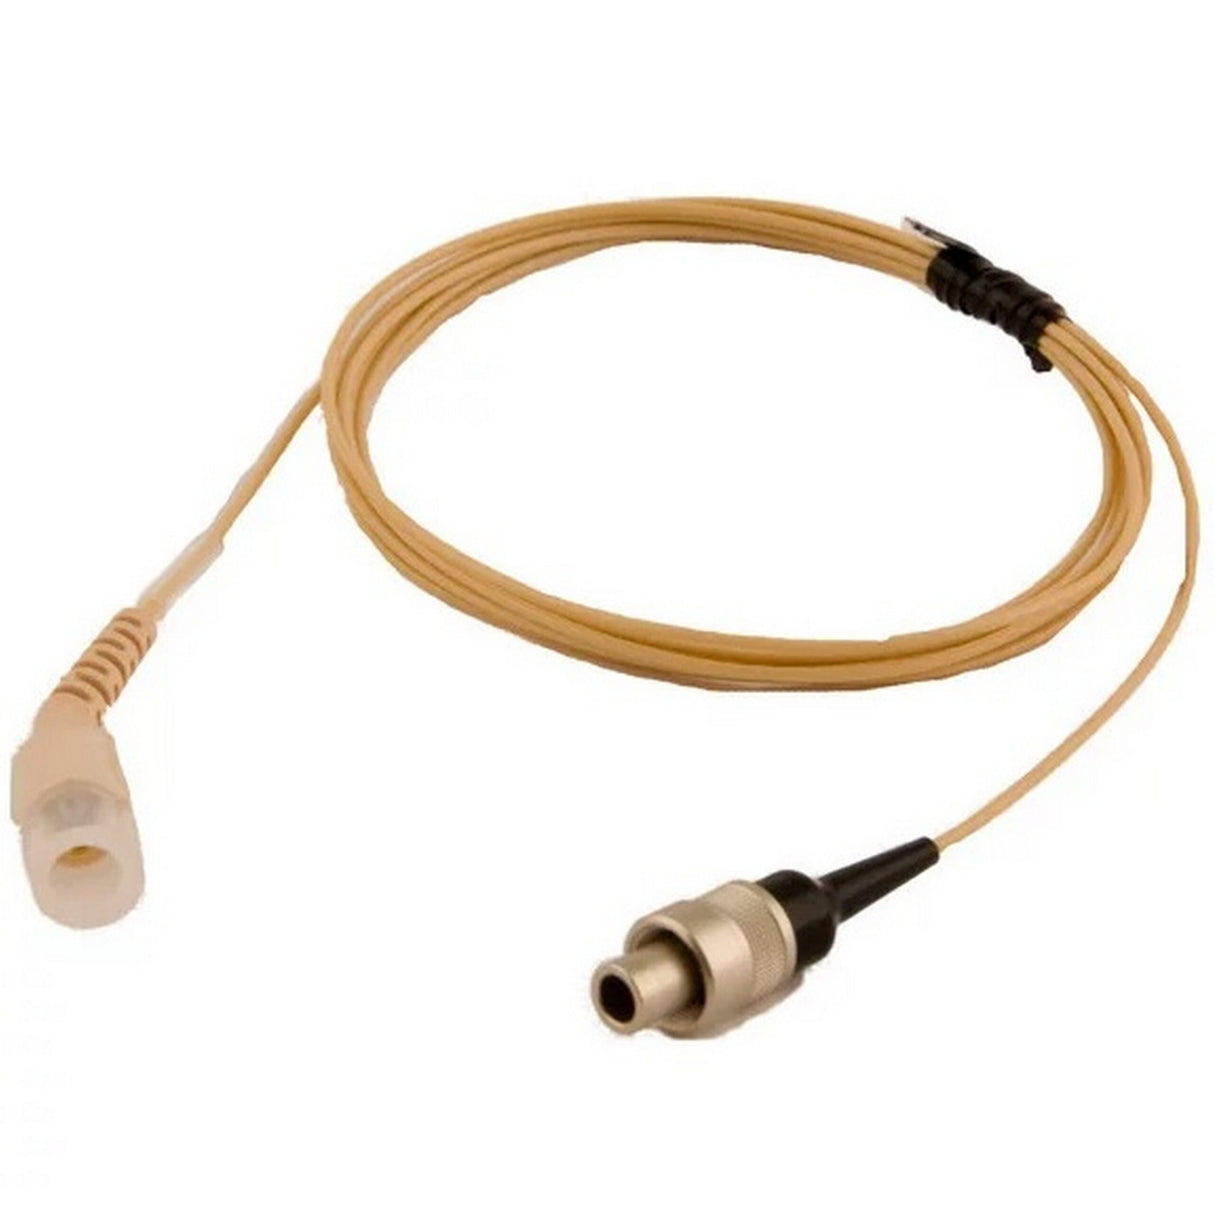 Sennheiser 511718 MKE Platinum Cable with 3-Pin Lemo Connector, Beige